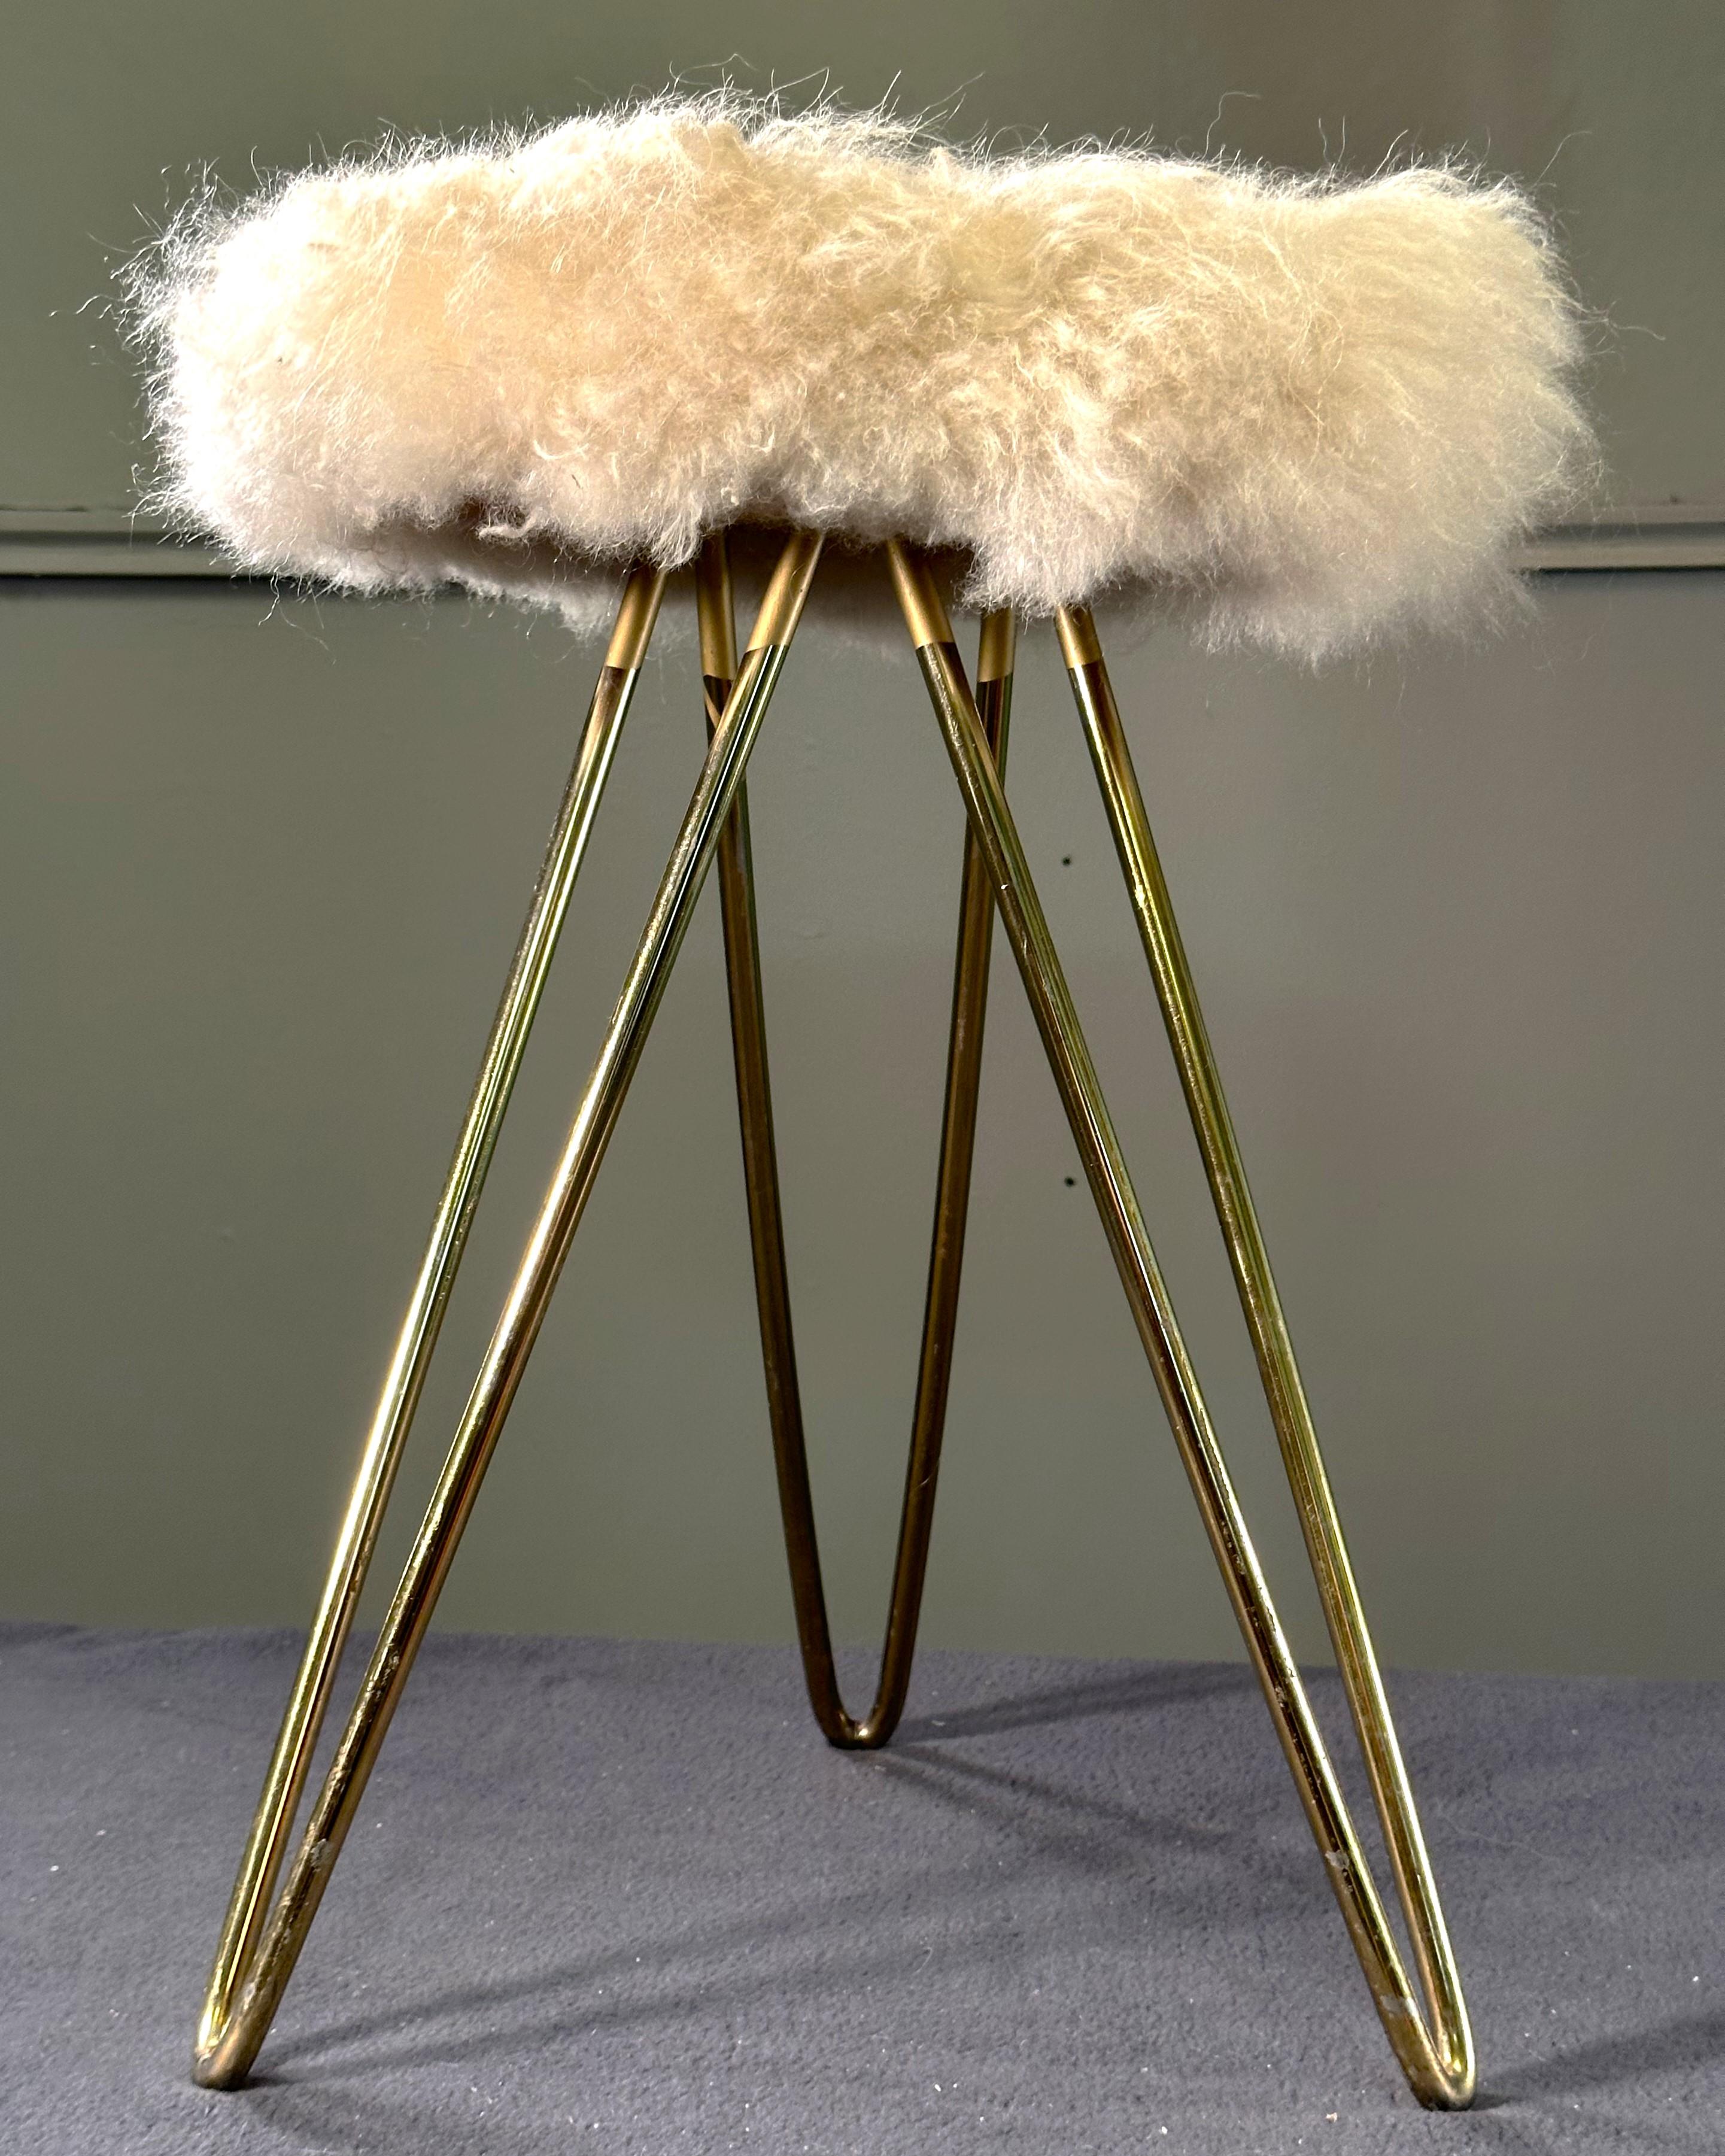 Mid-Century Hairpin Legs Fur Stool, 1950s, France For Sale 6